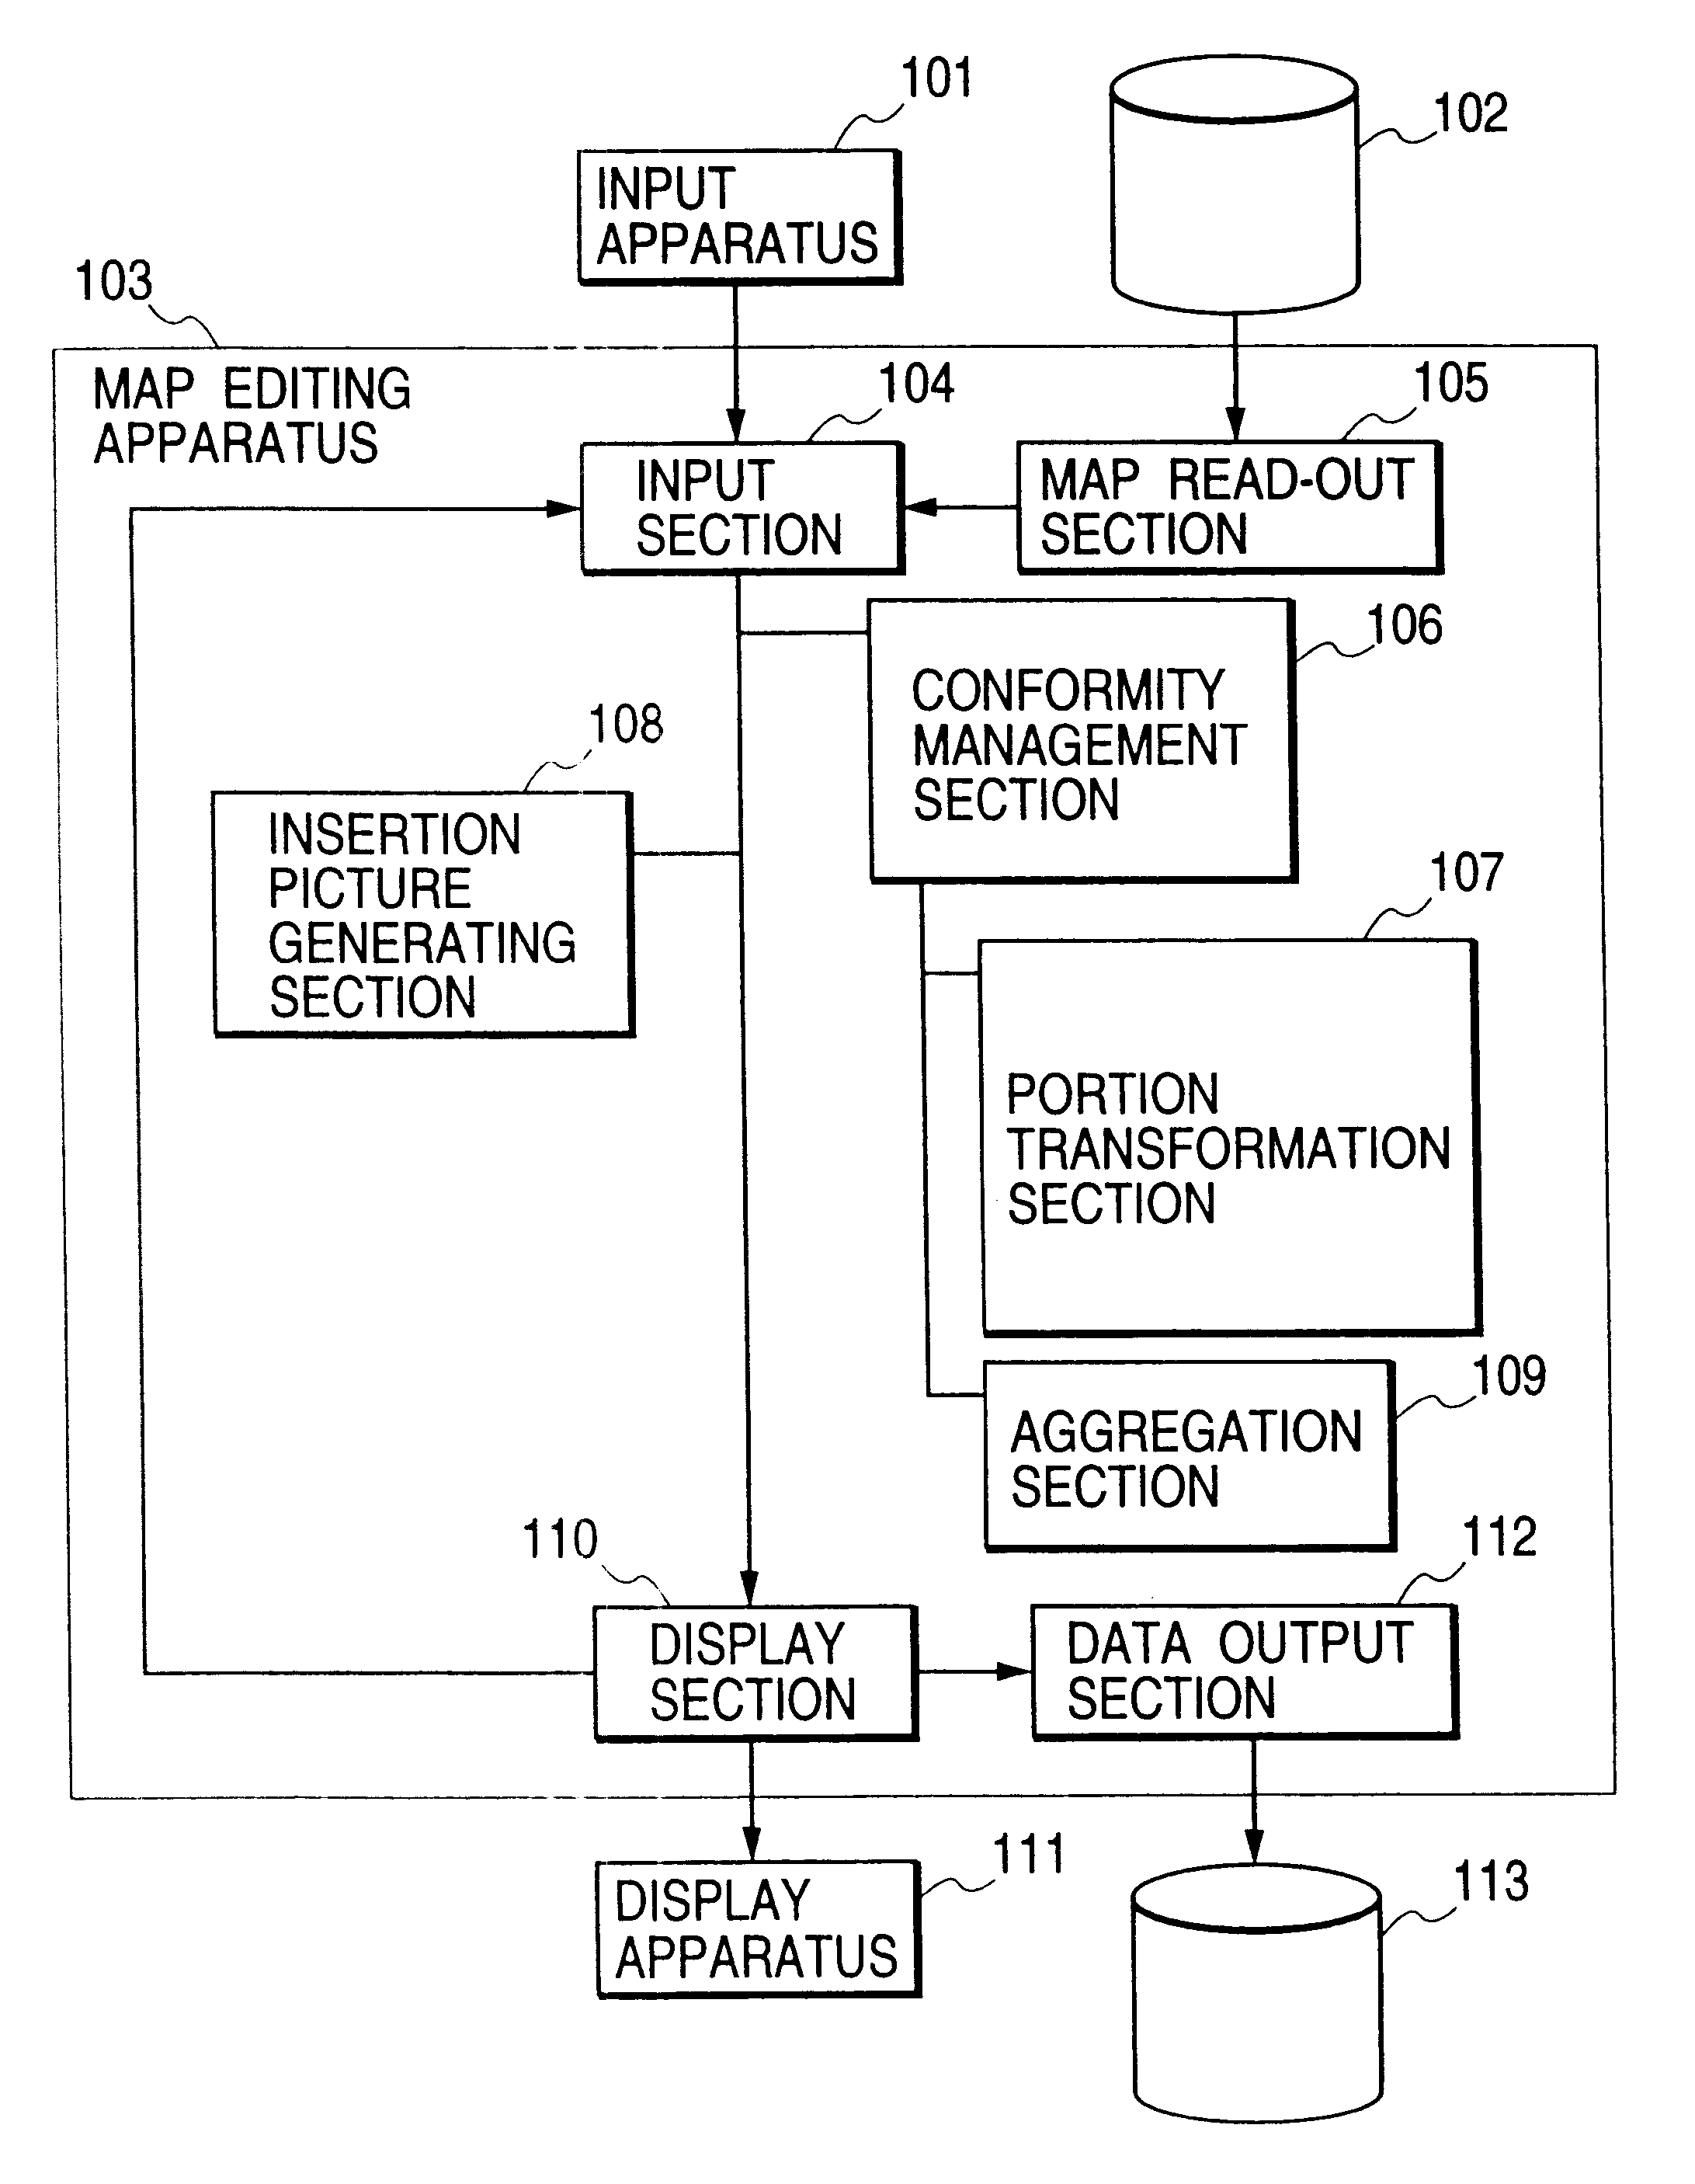 Map editing apparatus enabling simplified editing through provision of user-selectable automatic editing functions